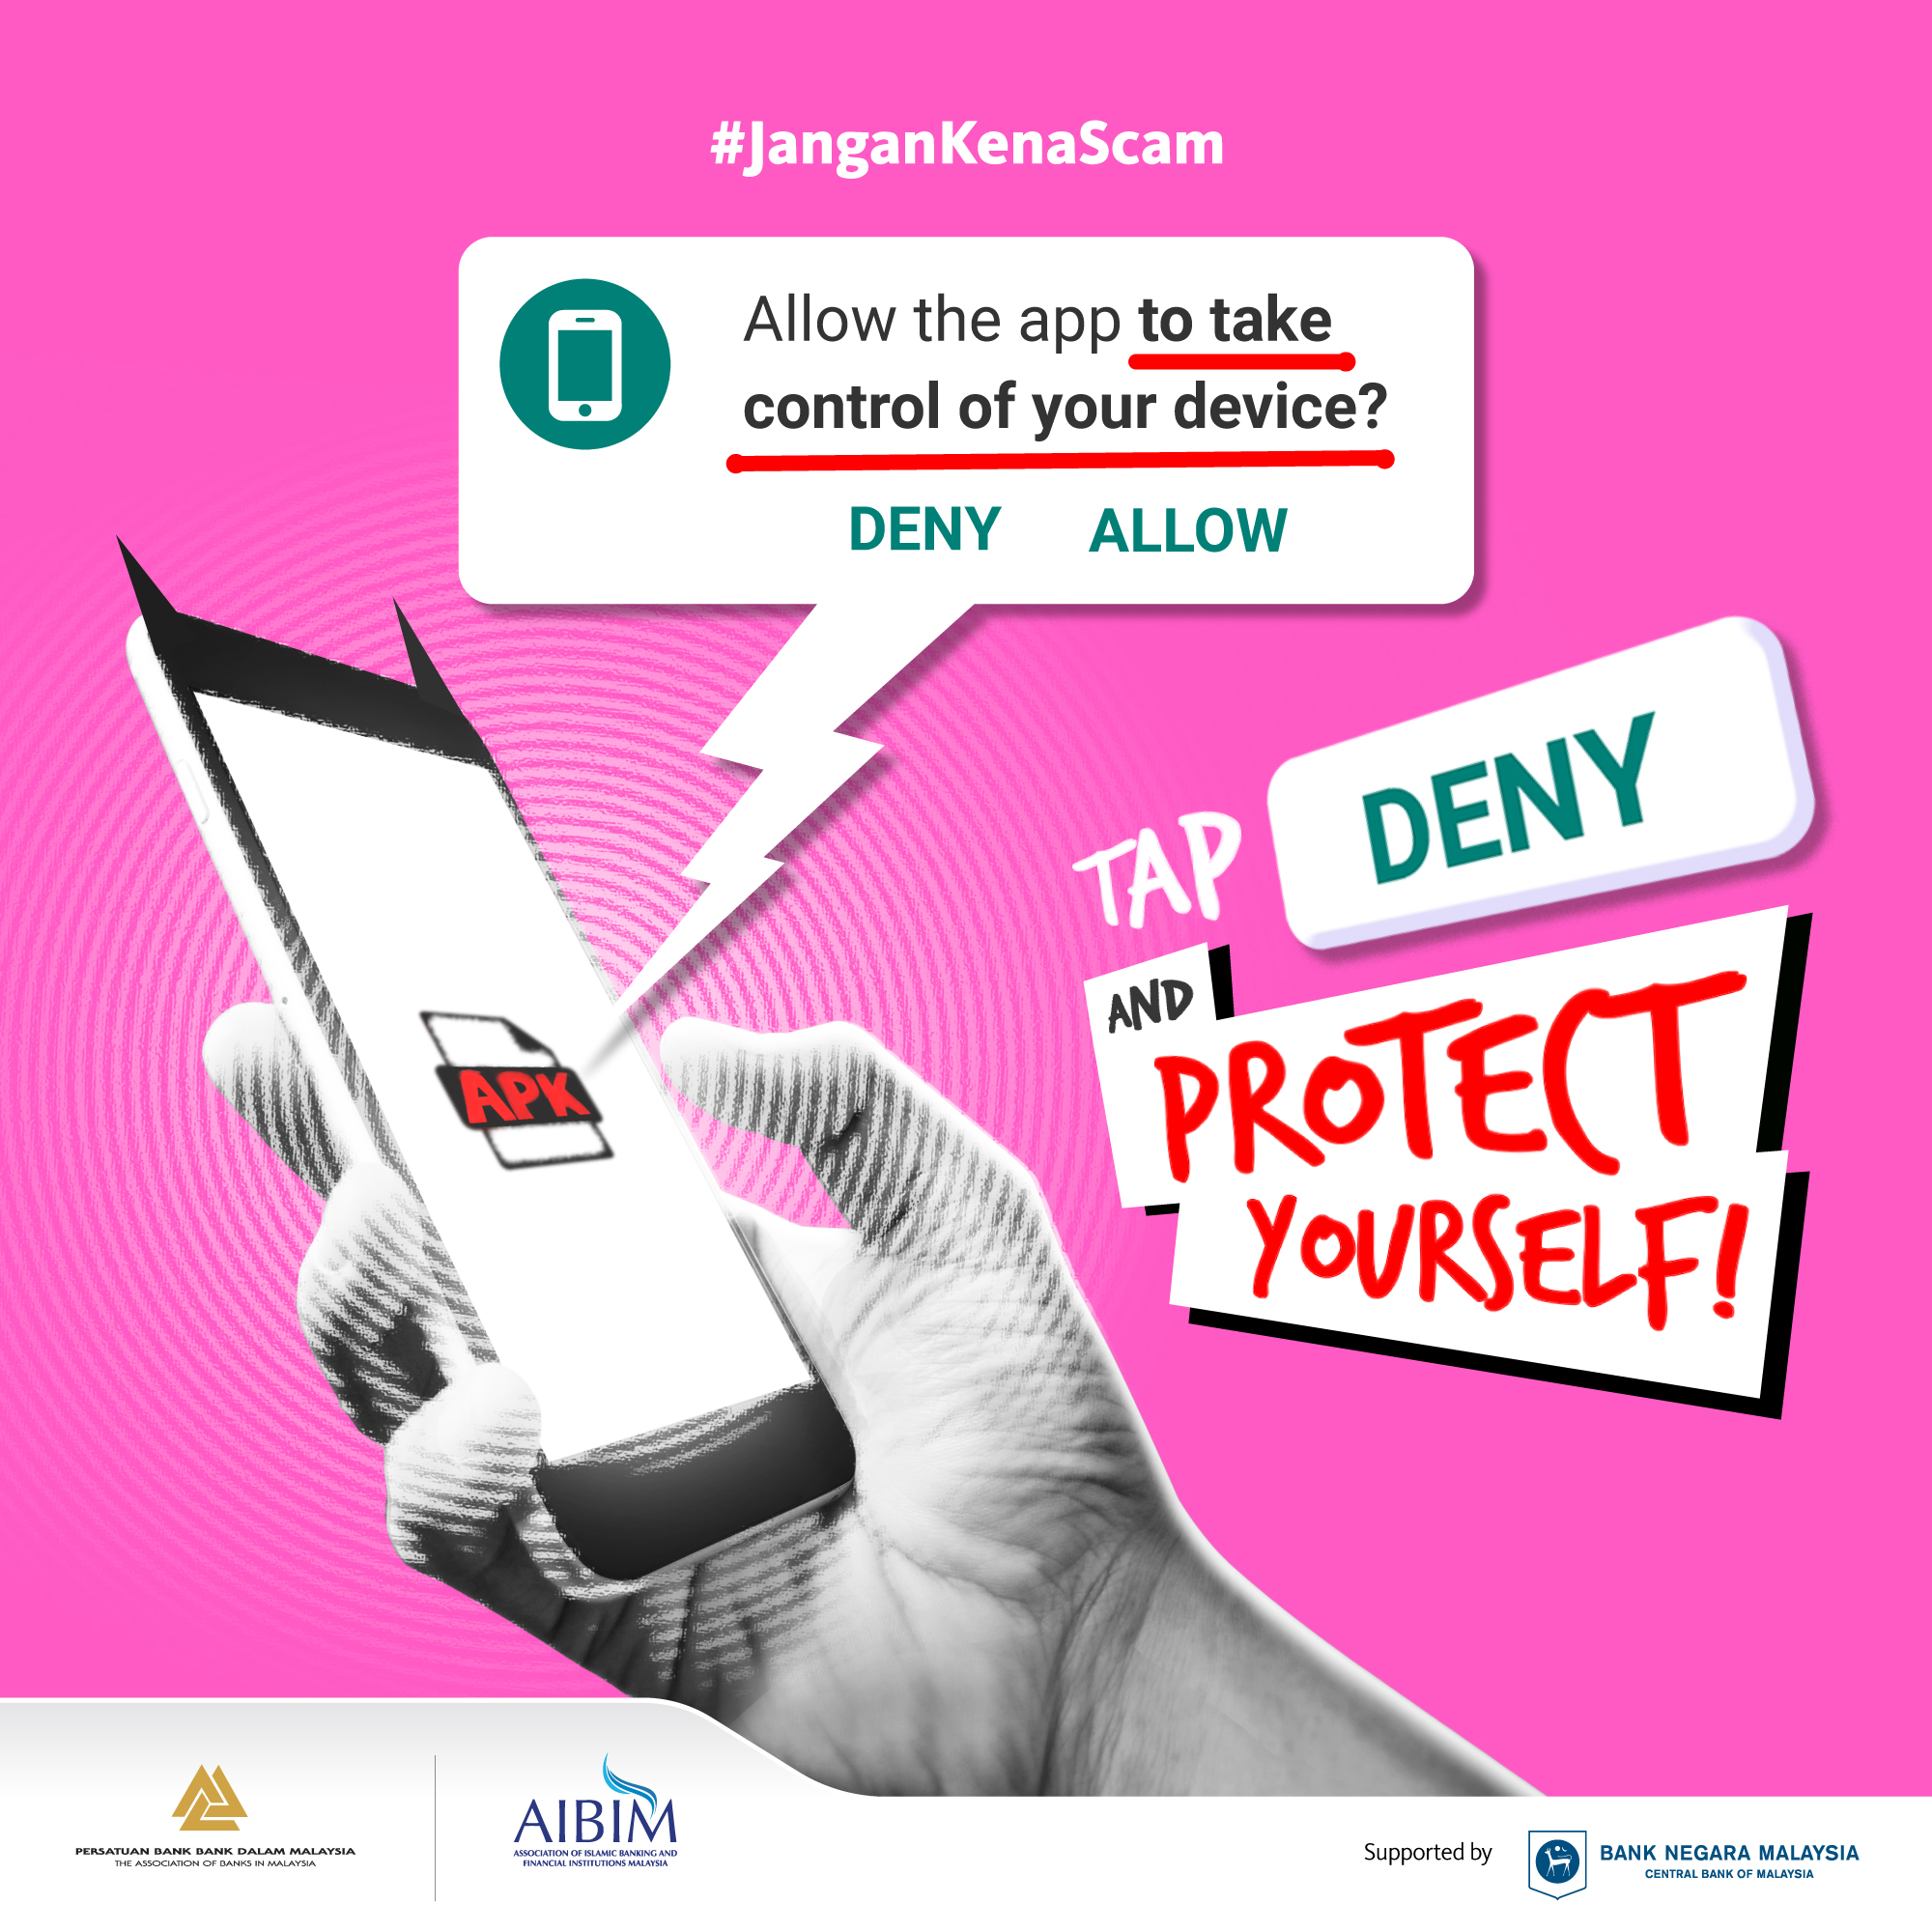 Image for #JanganKenaScam: Tap “DENY” and protect yourself!